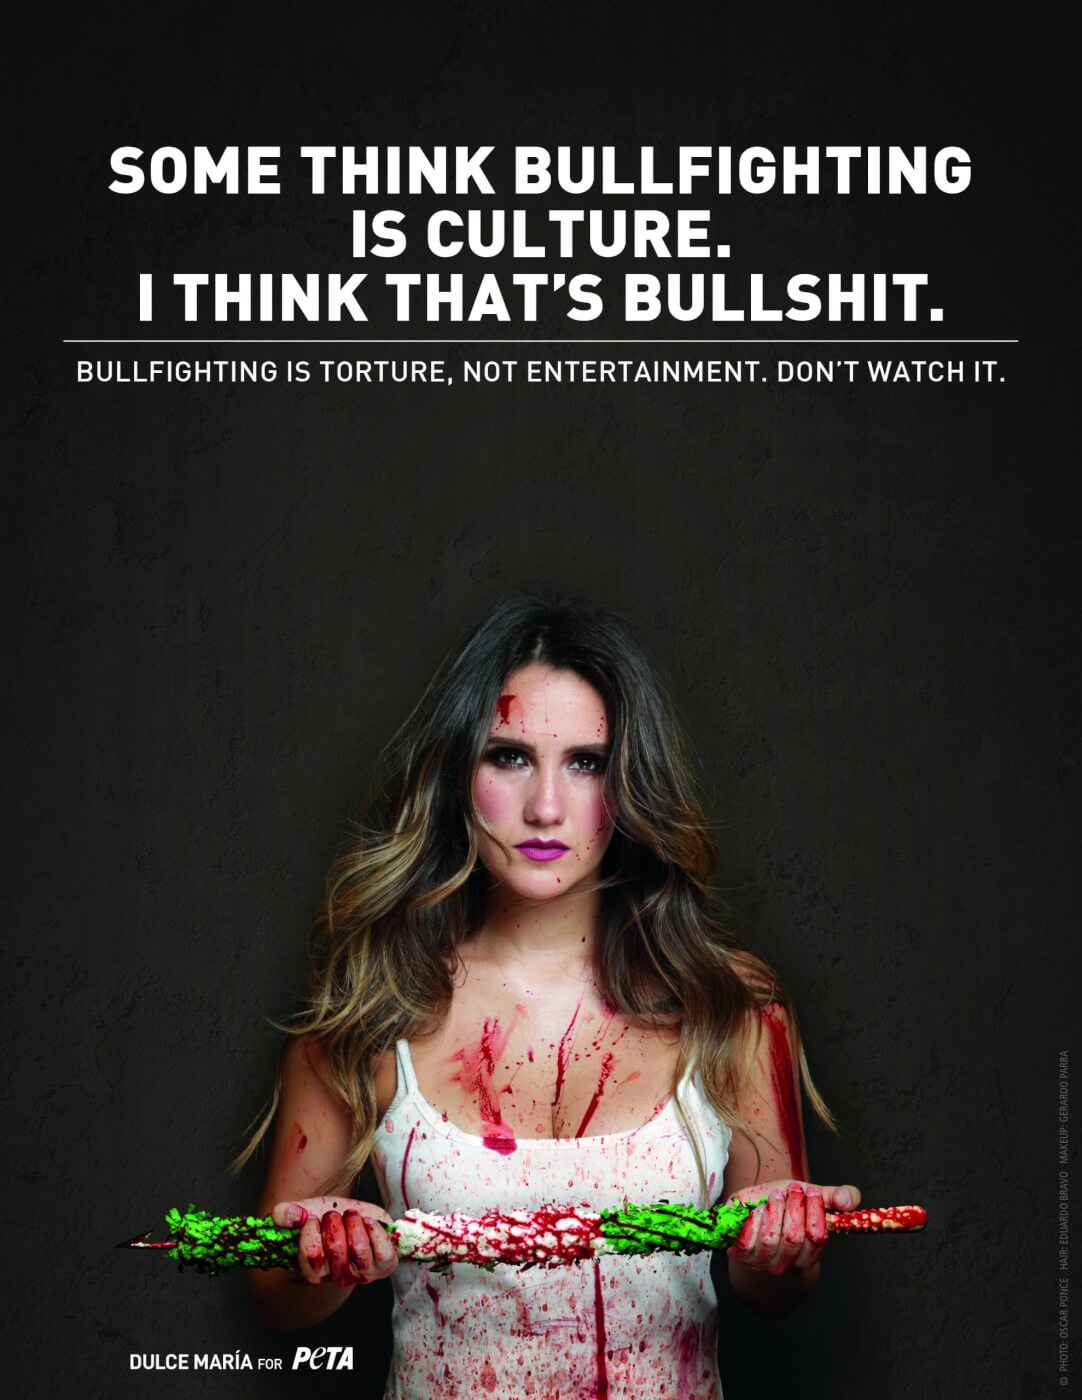 Dulce Maria with PSA text reading some think bullfighting is culture. I think that's bullshit. Bullfighting is torture, not entertainment. Don't watch it